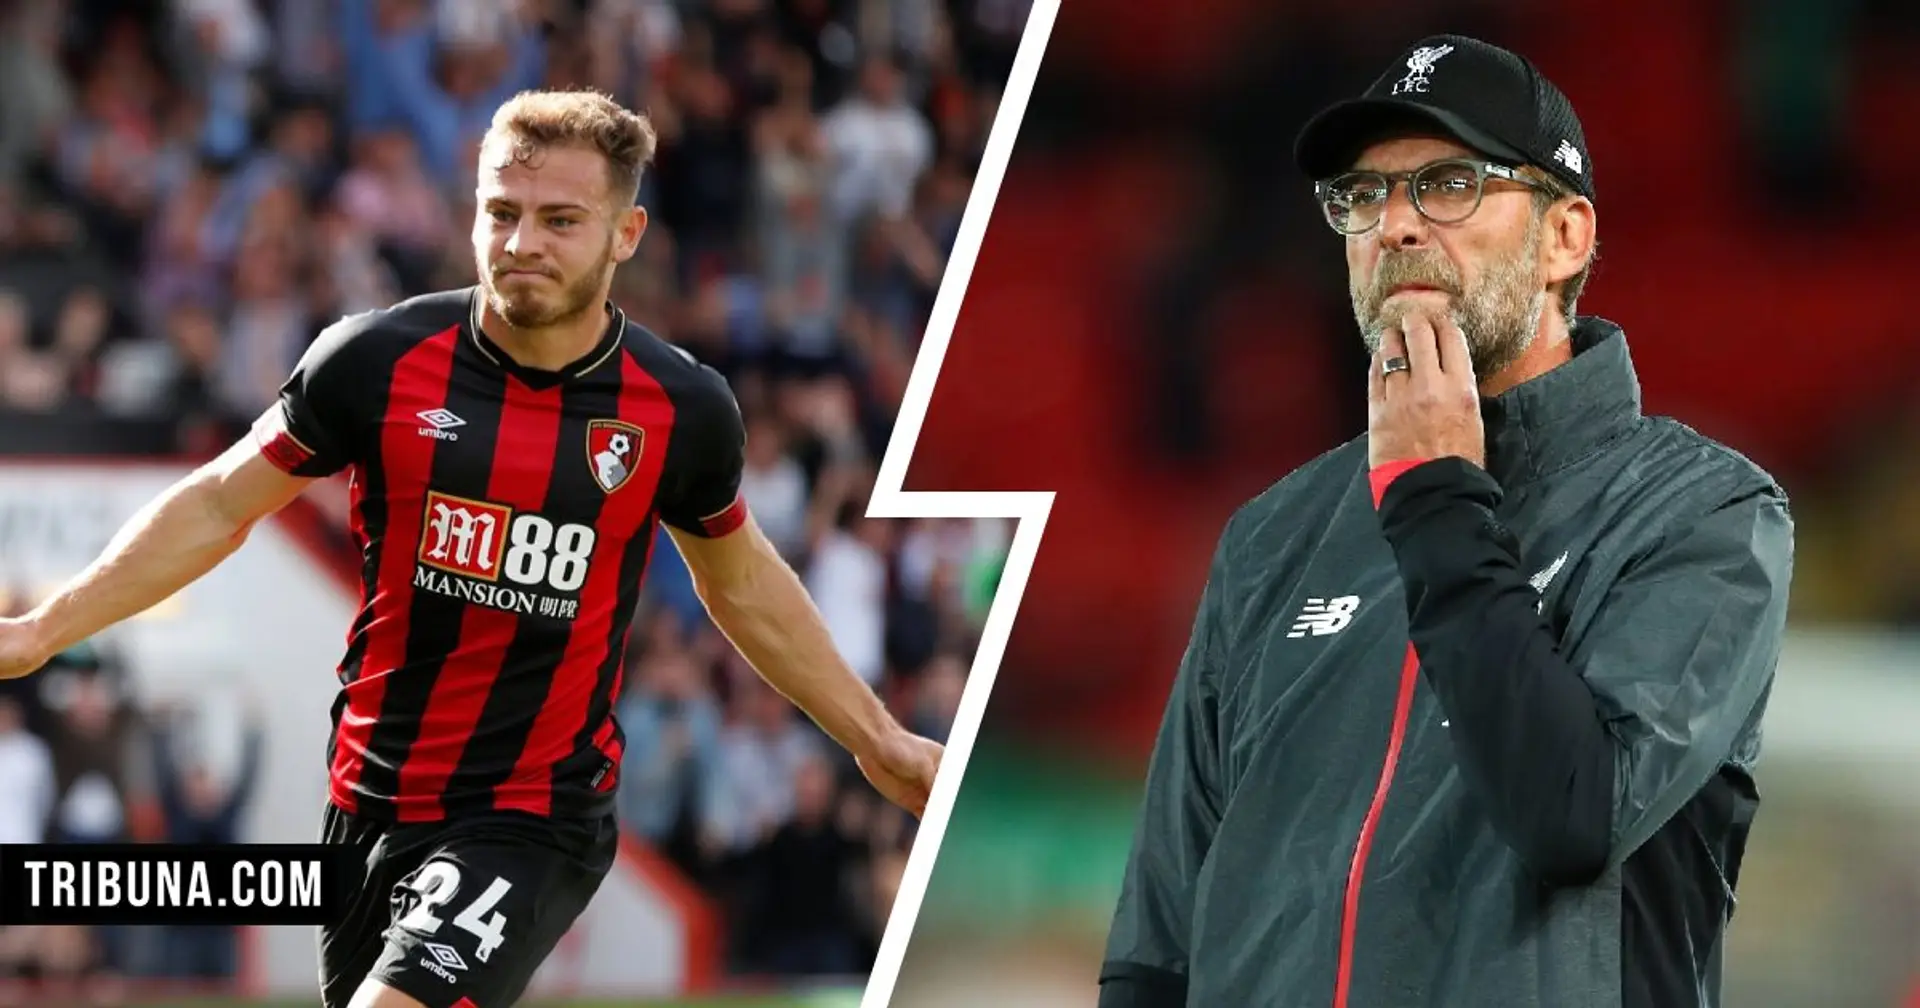 🤔 THURSDAY TRANSFER: Ryan Fraser will be free agent in two weeks - should Liverpool move for him and why?